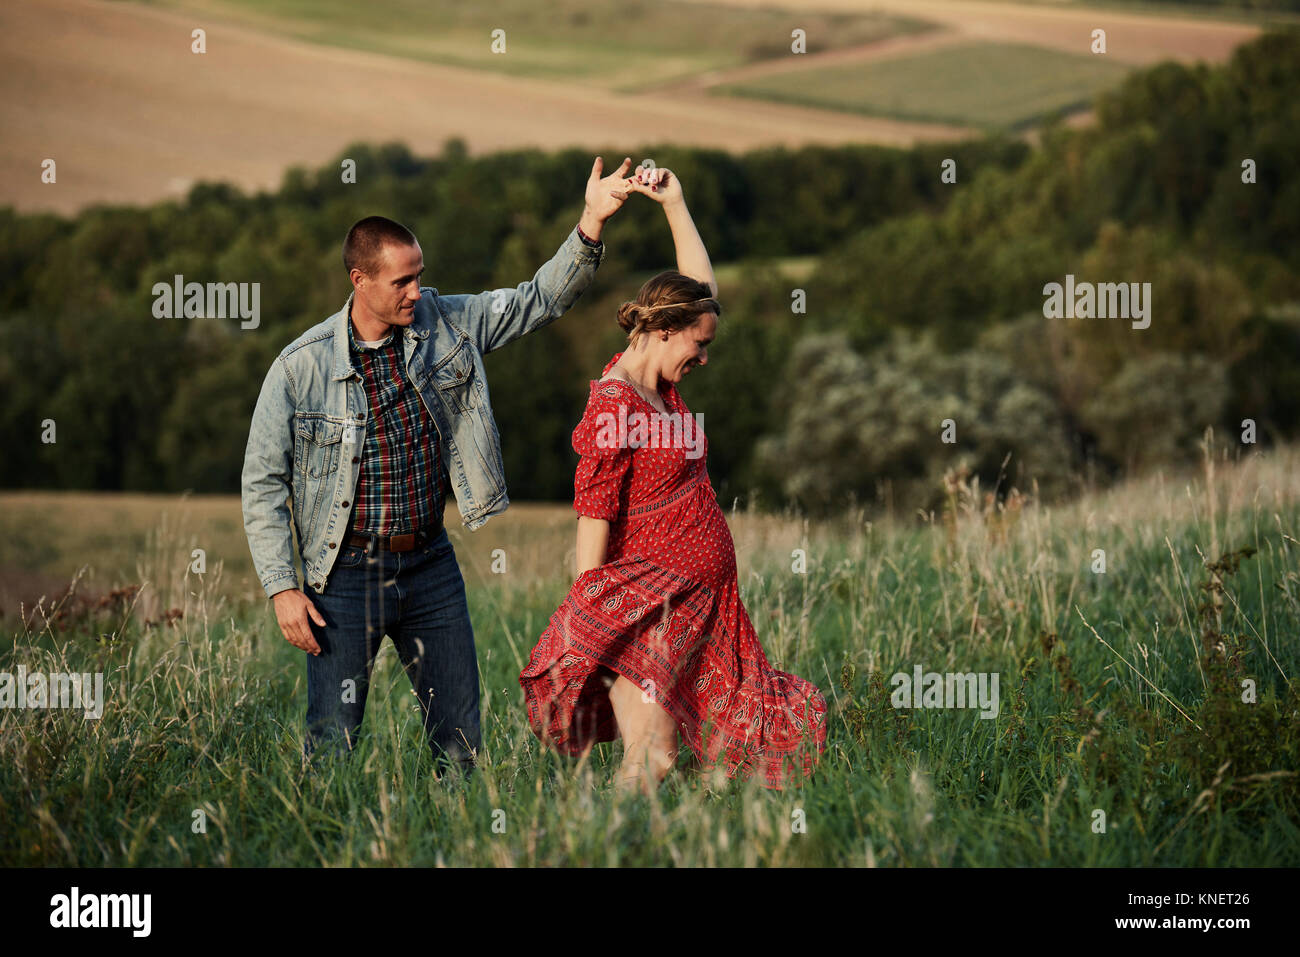 Romantic pregnant mid adult couple dancing in field Stock Photo